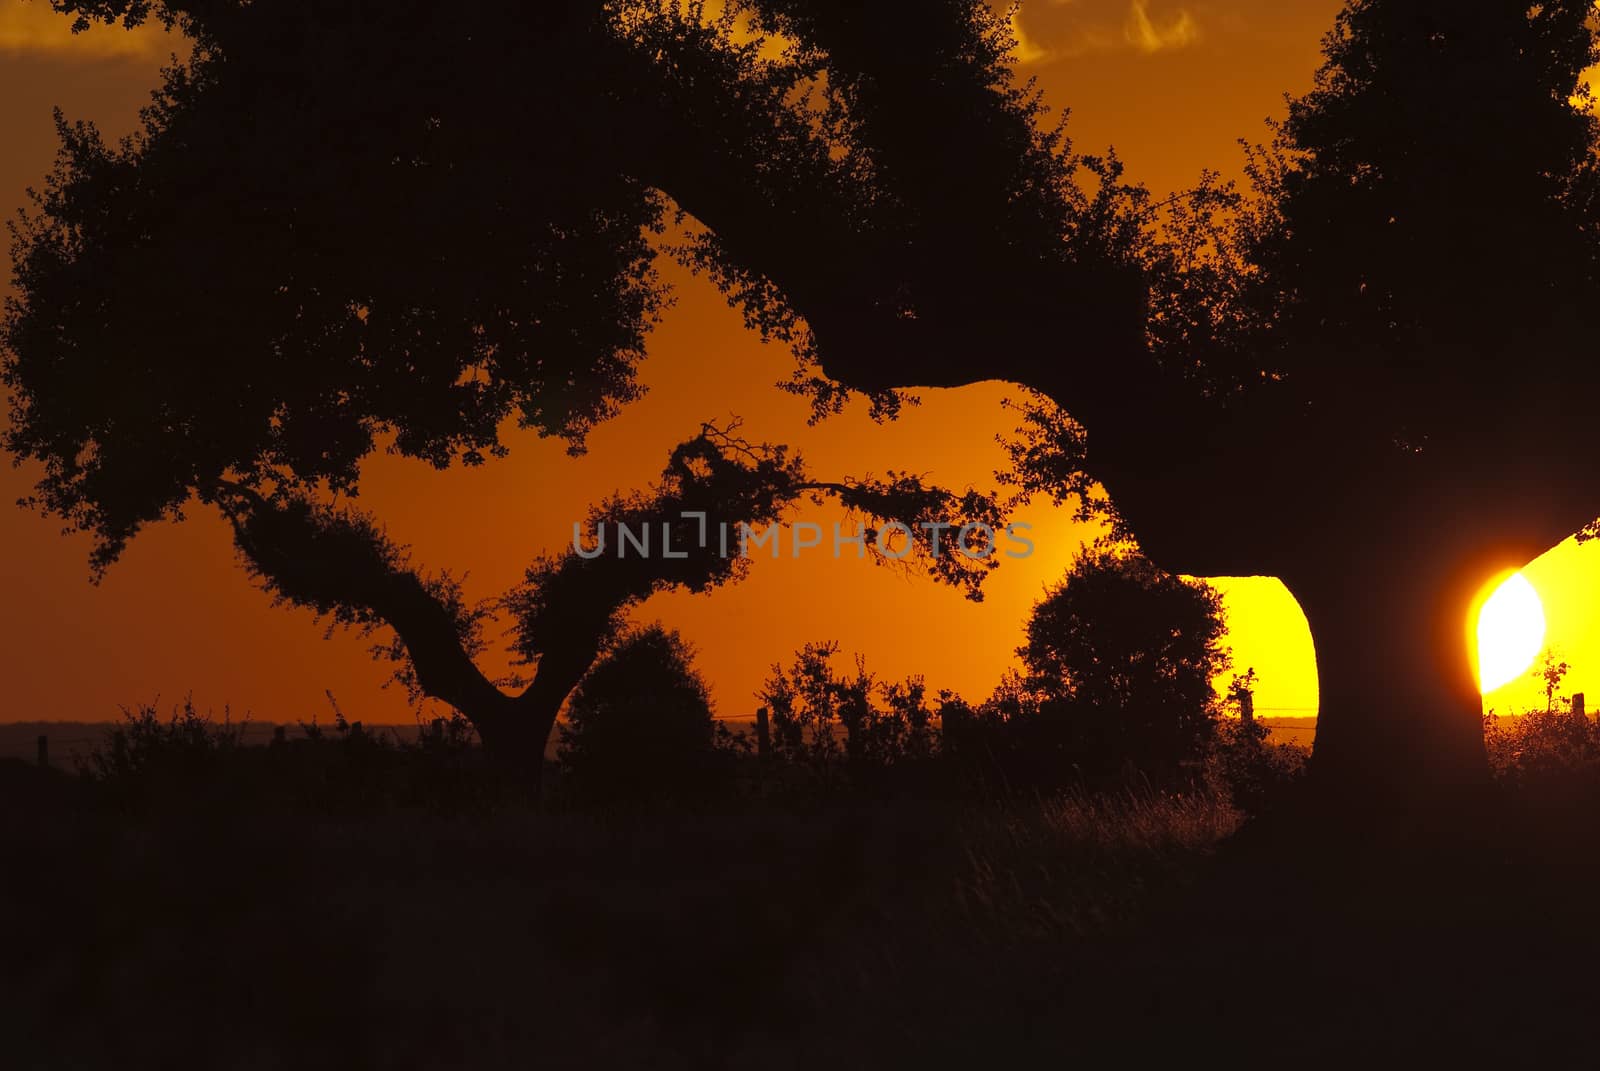 Dehesa with oaks at sunset, (Quercus ilex), Spain by jalonsohu@gmail.com